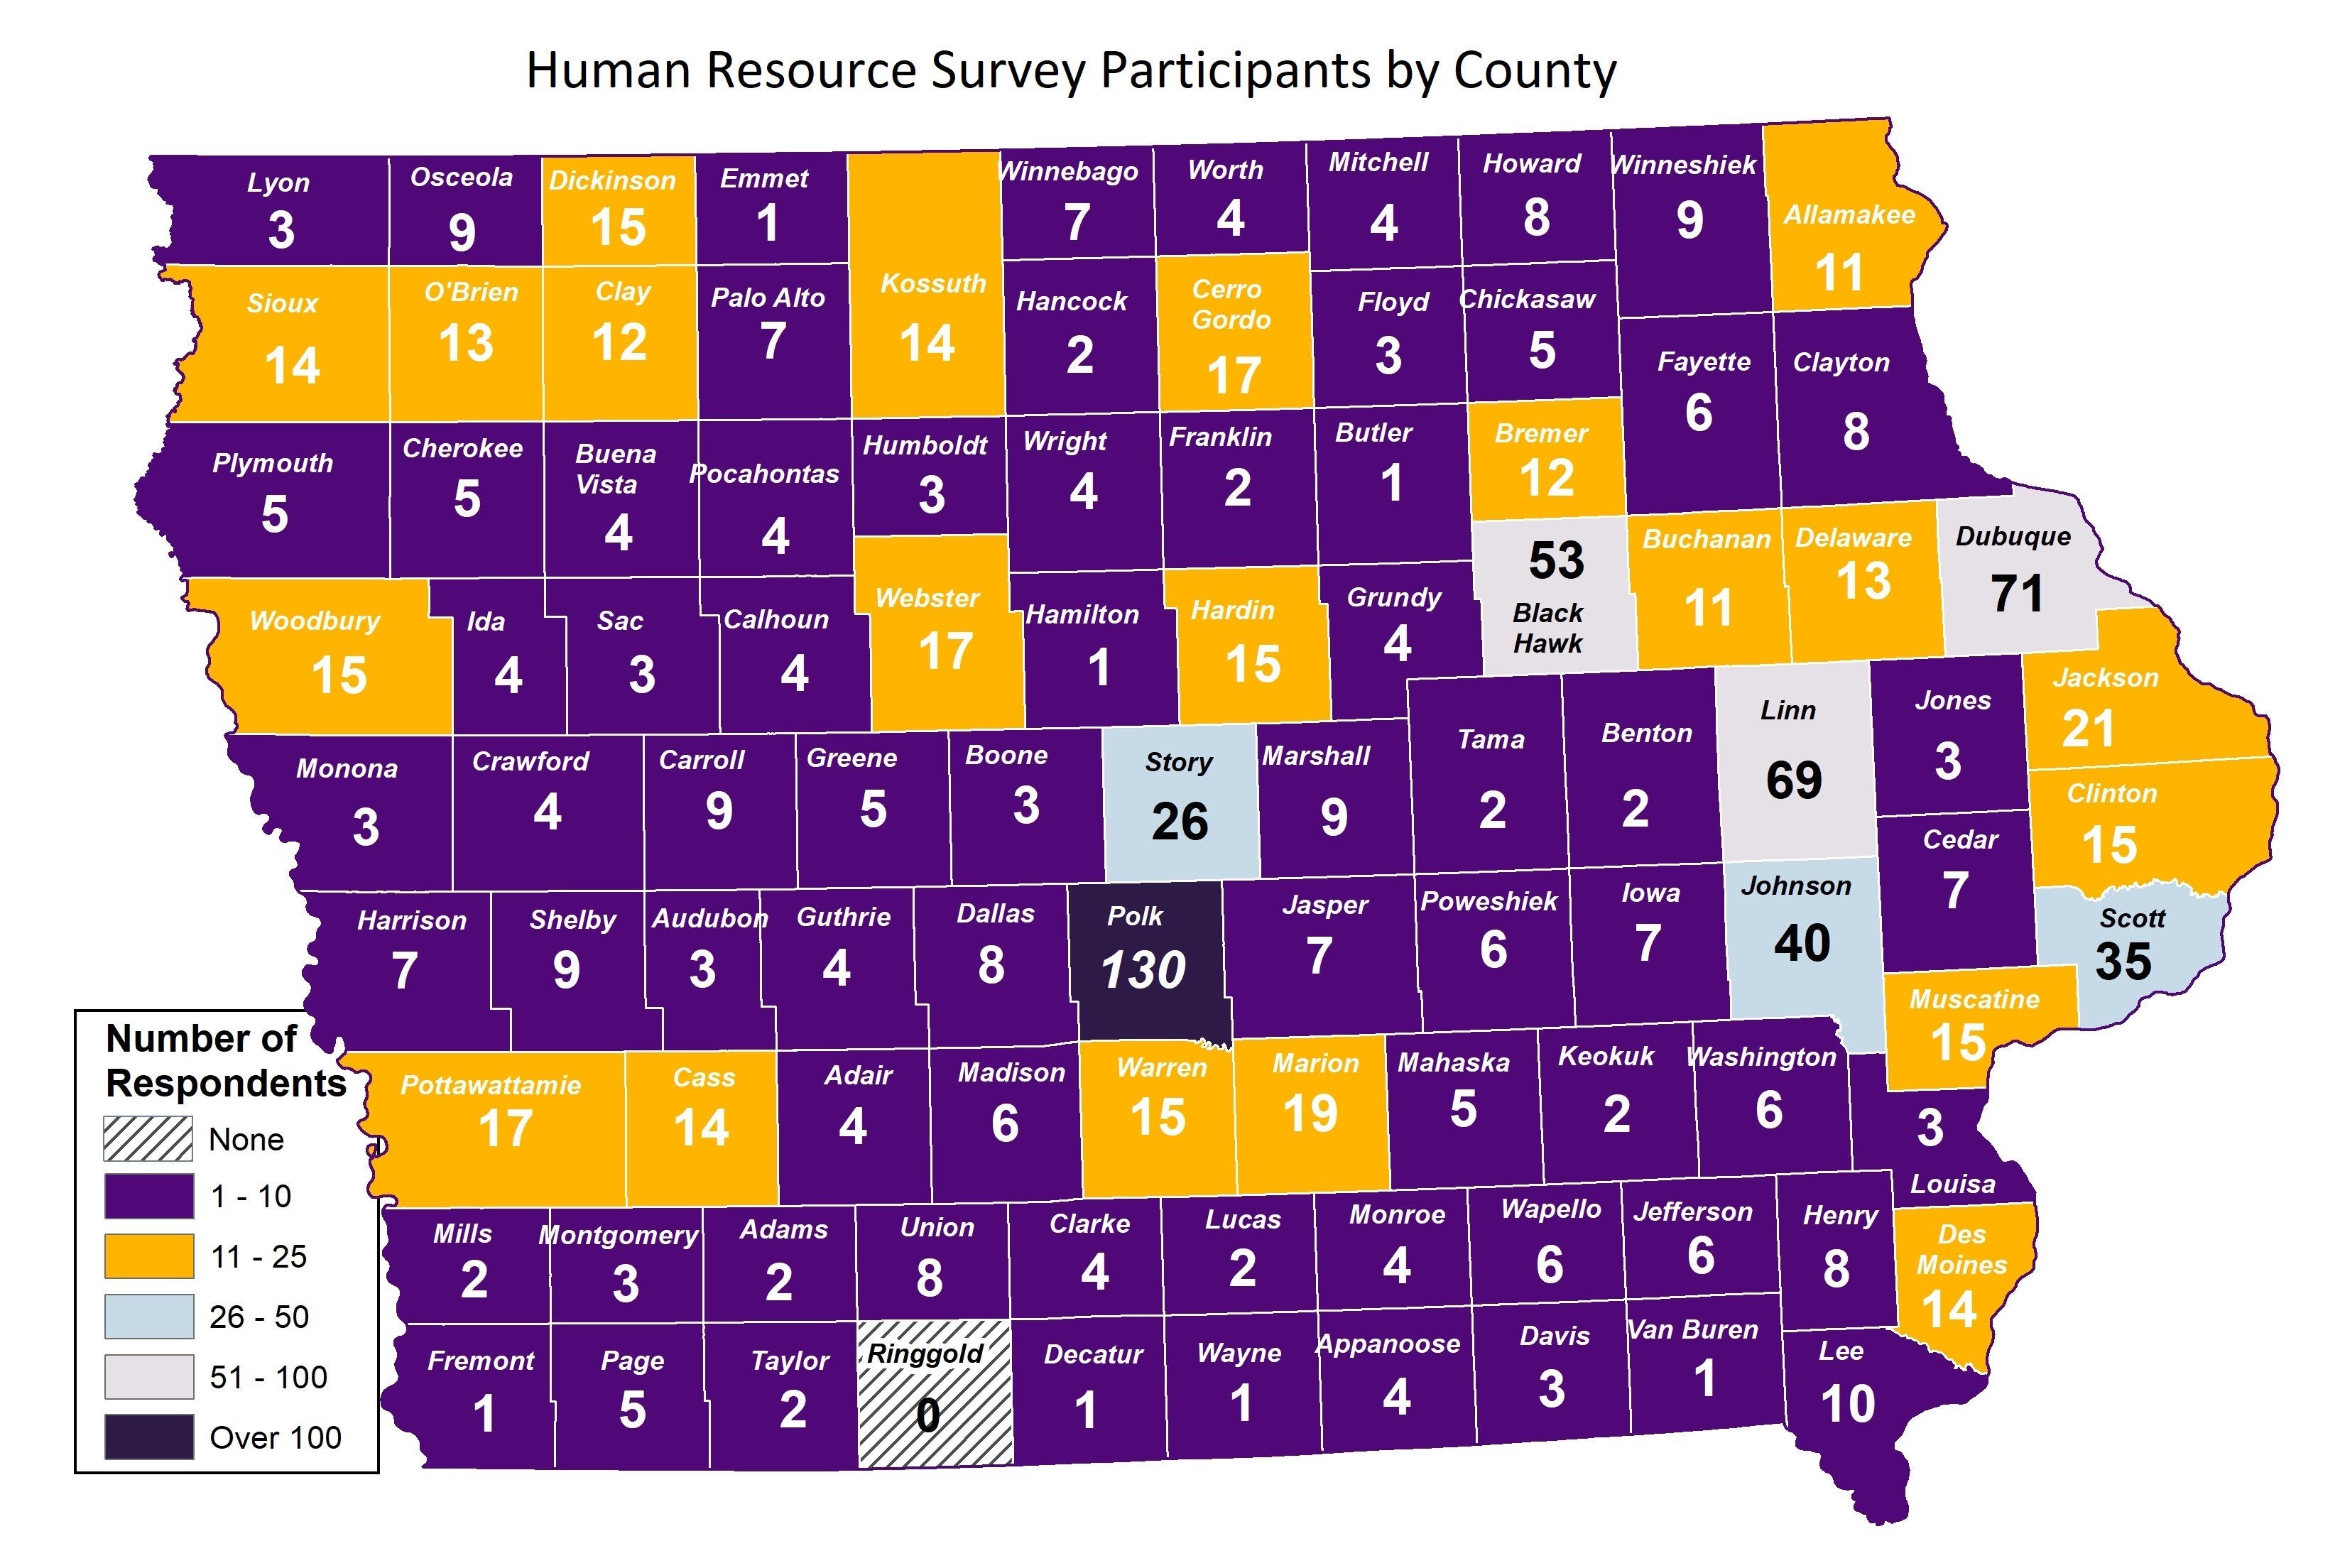 Human Resource Survey Participants by Country